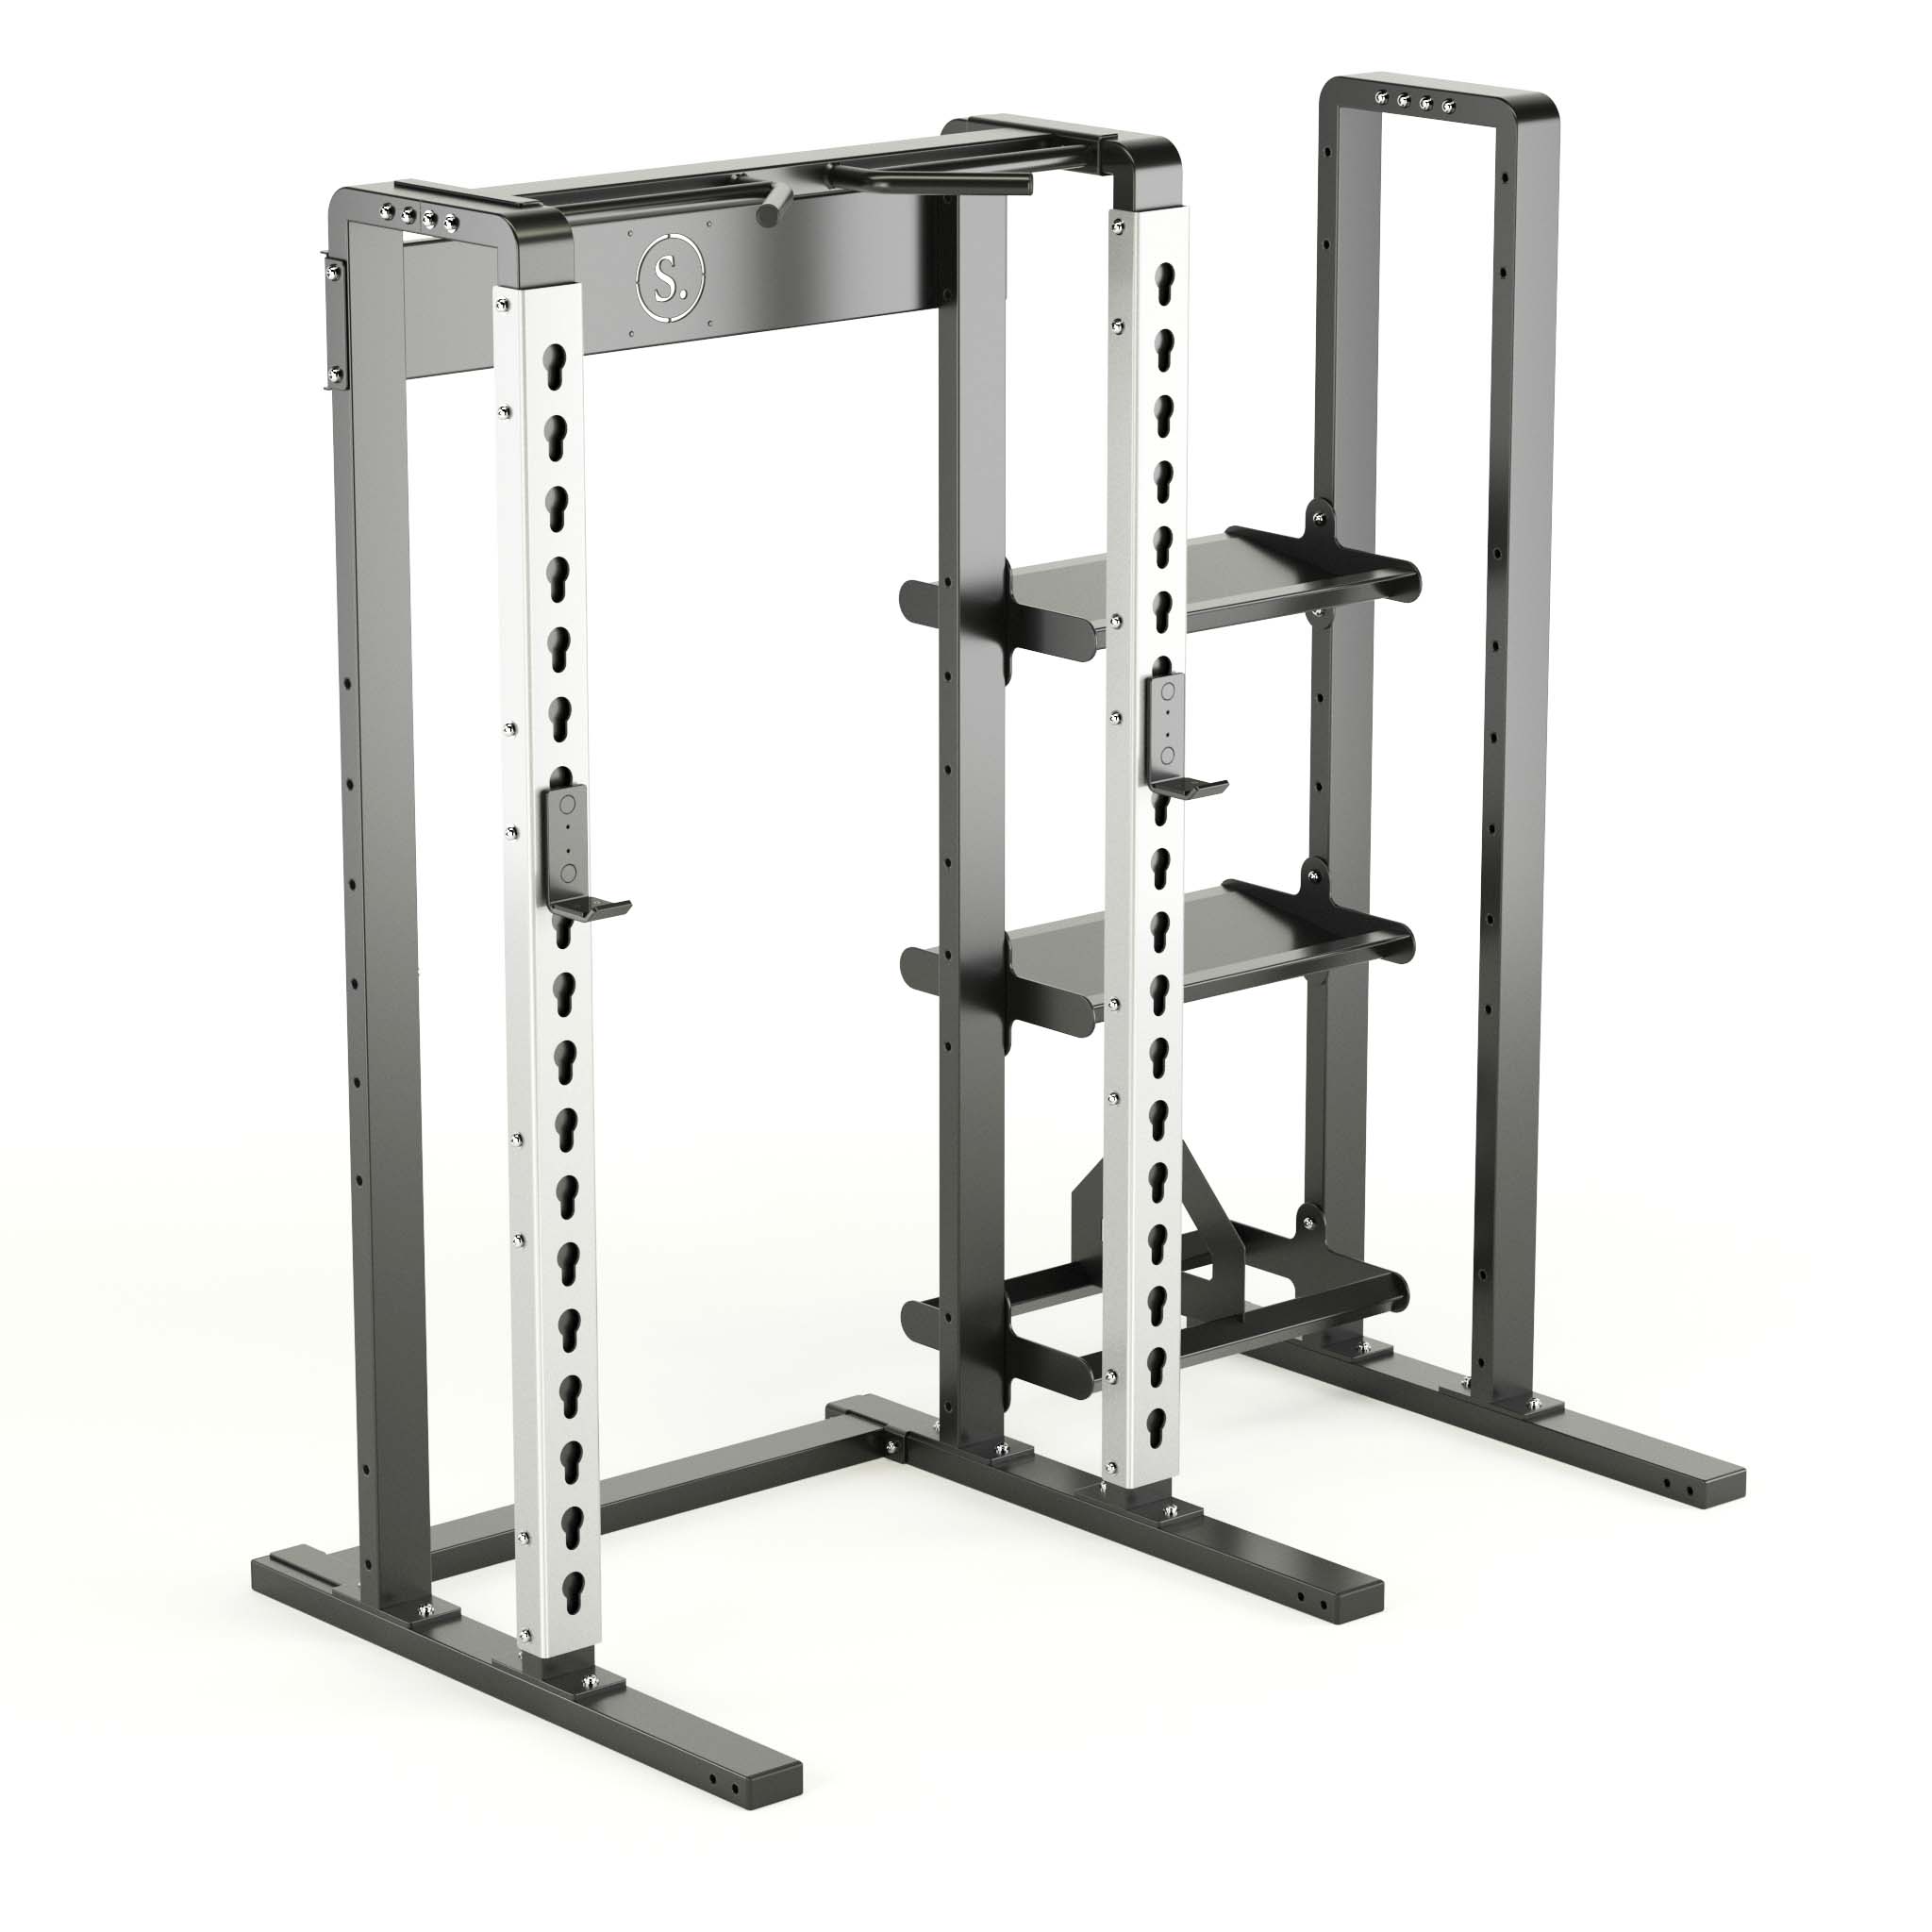 Solo half rack with compact storage in silver